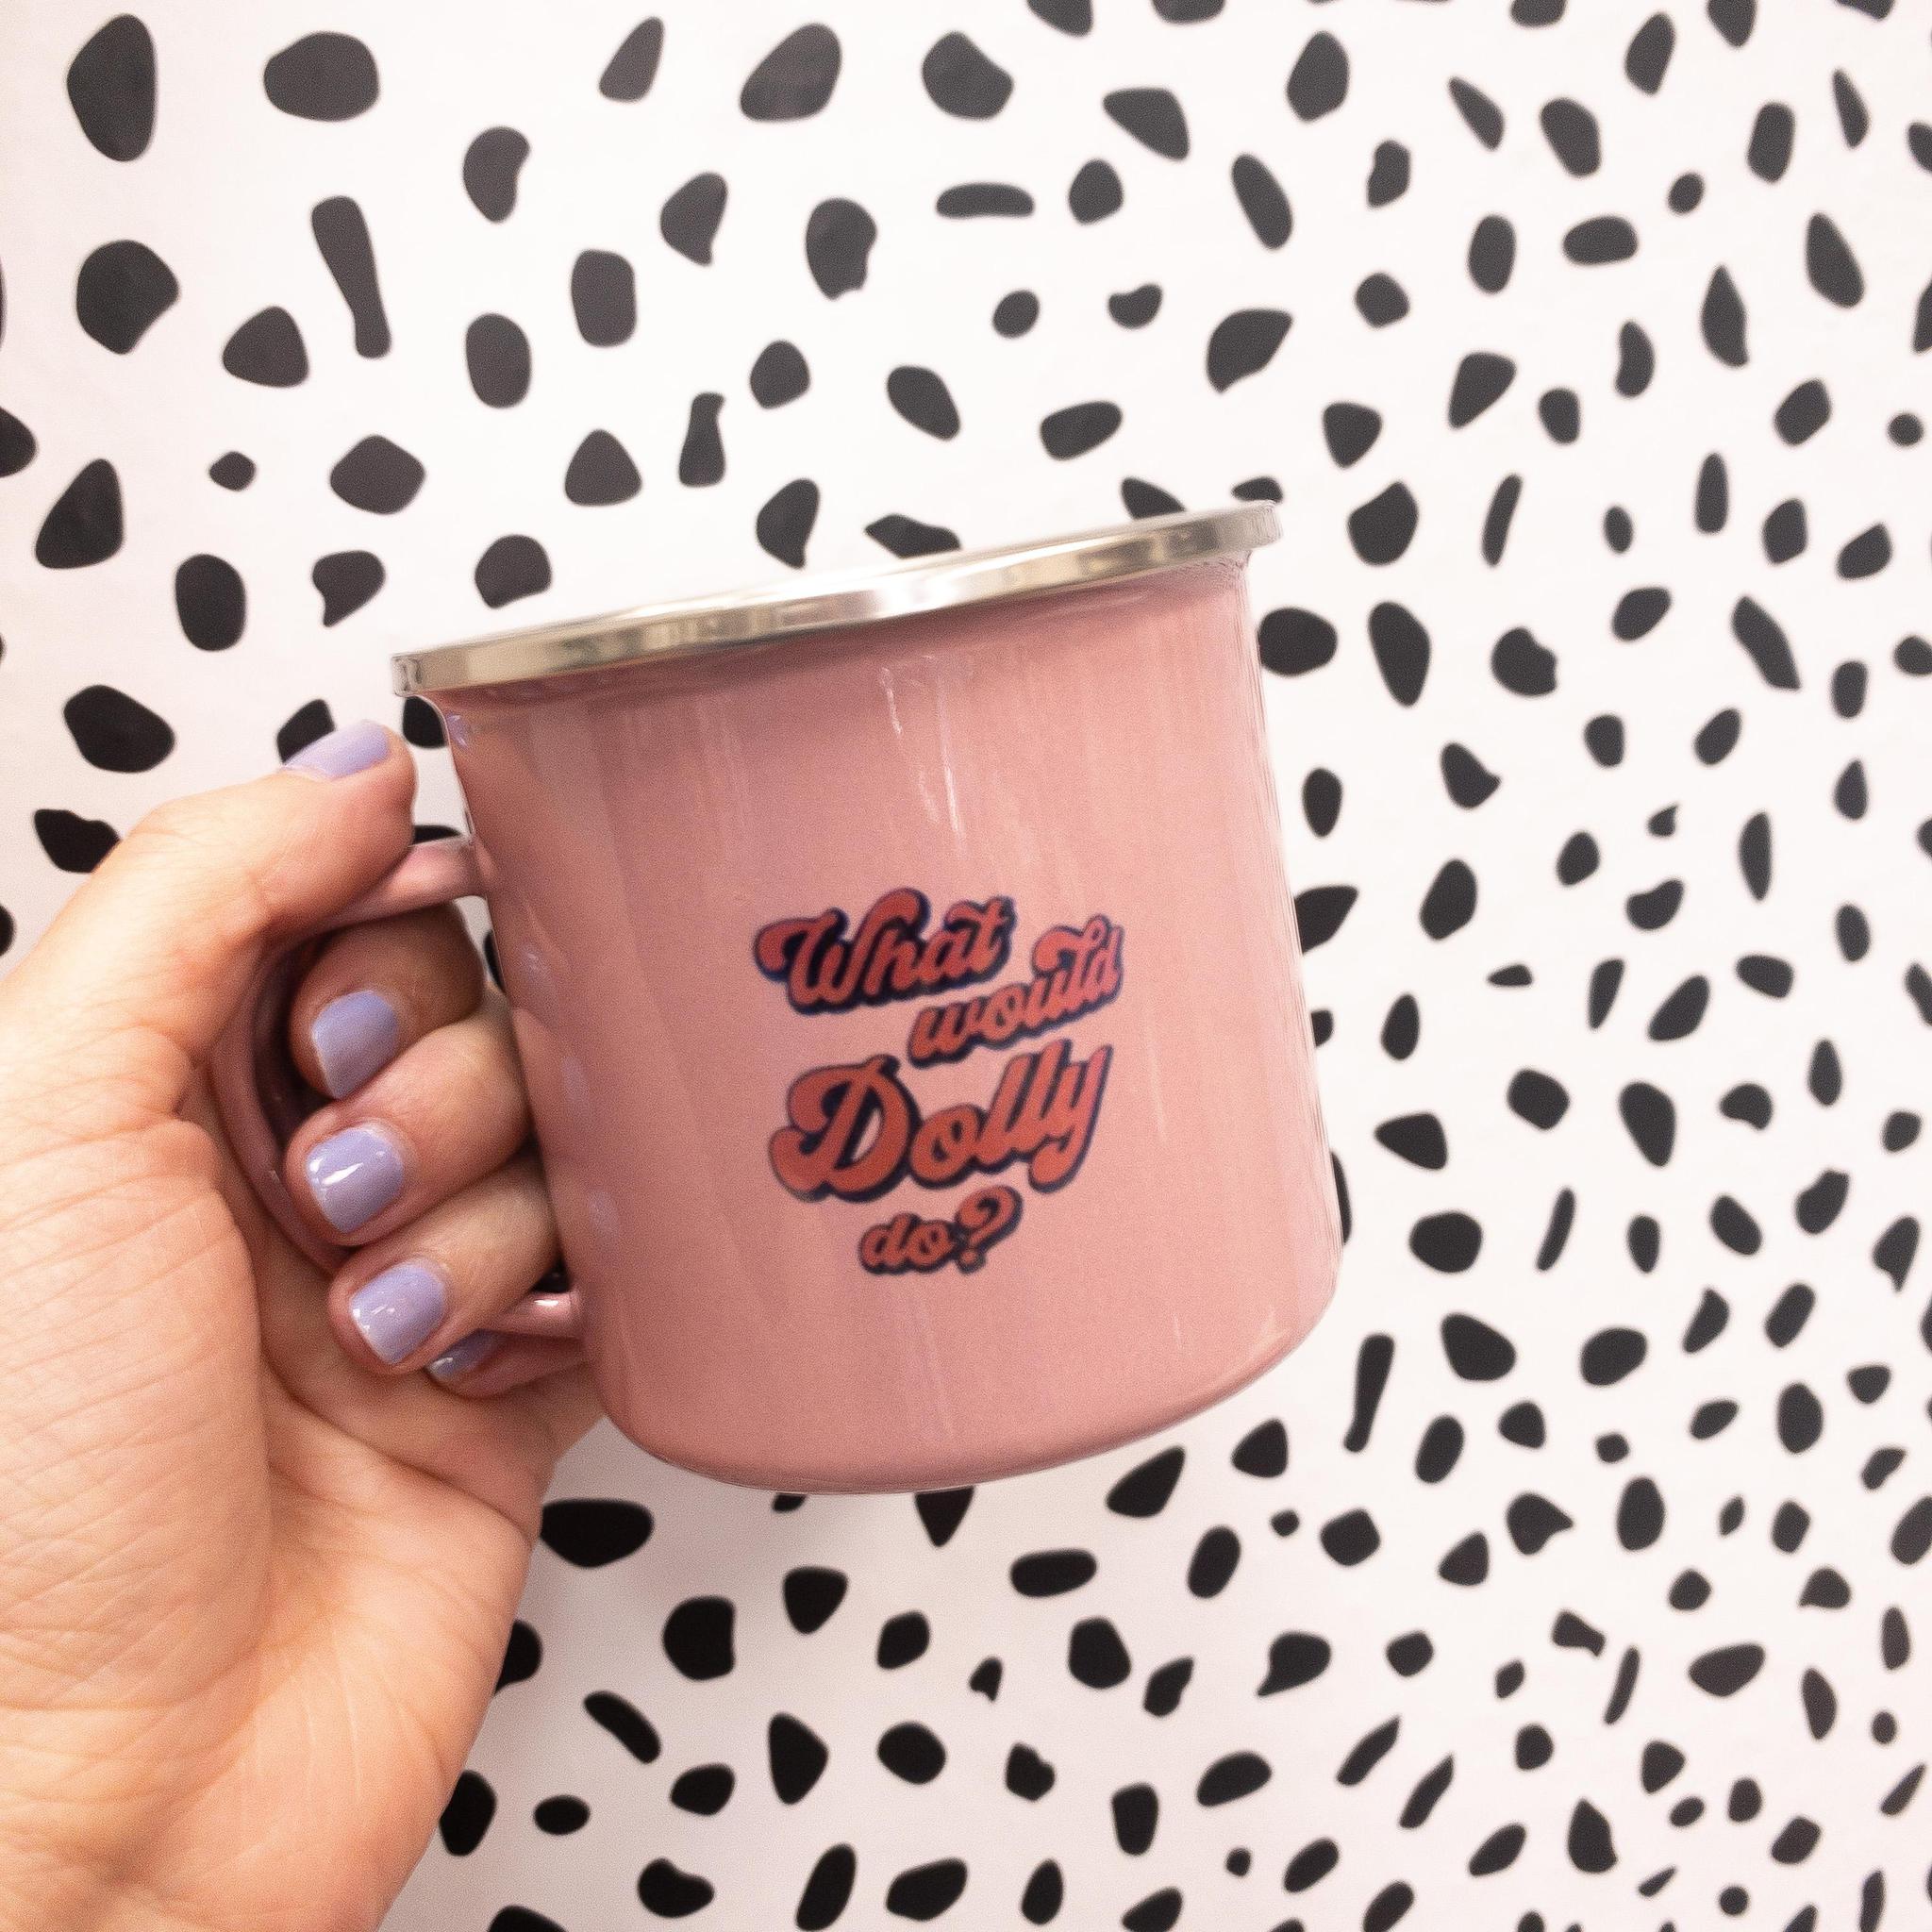 What Would Dolly Do? Mug